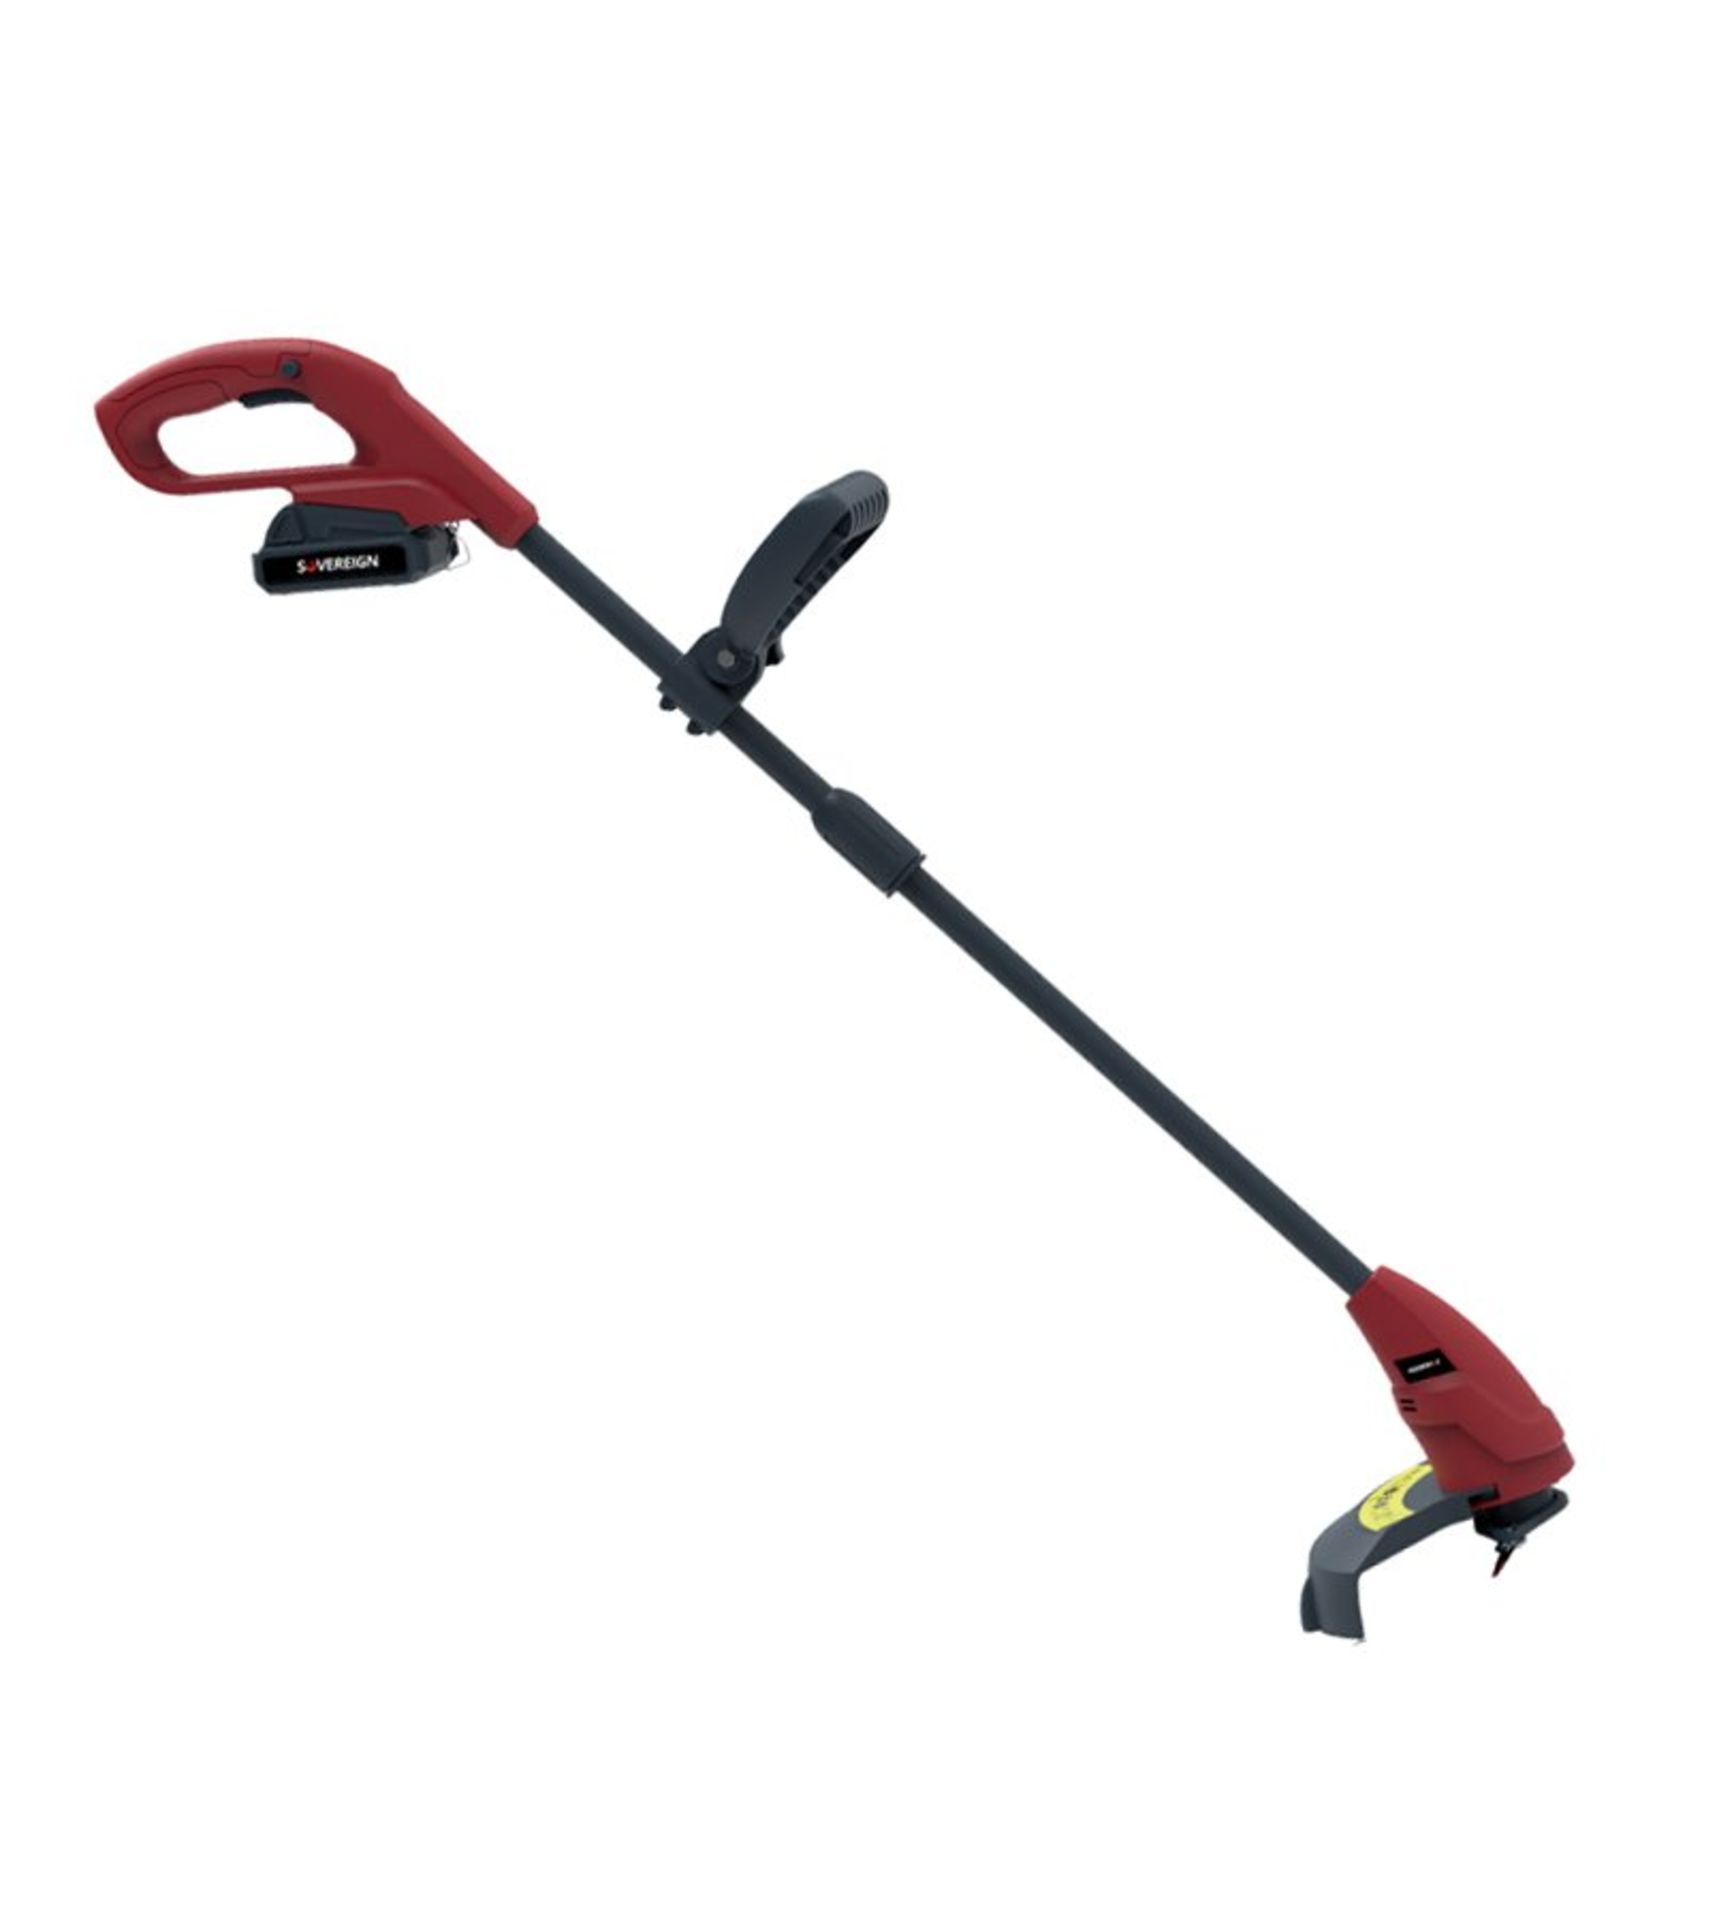 (R14) 6x Sovereign 18V Cordless Grass Trimmer. (All With Battery & Charger). RRP £45 Each. - Image 2 of 3